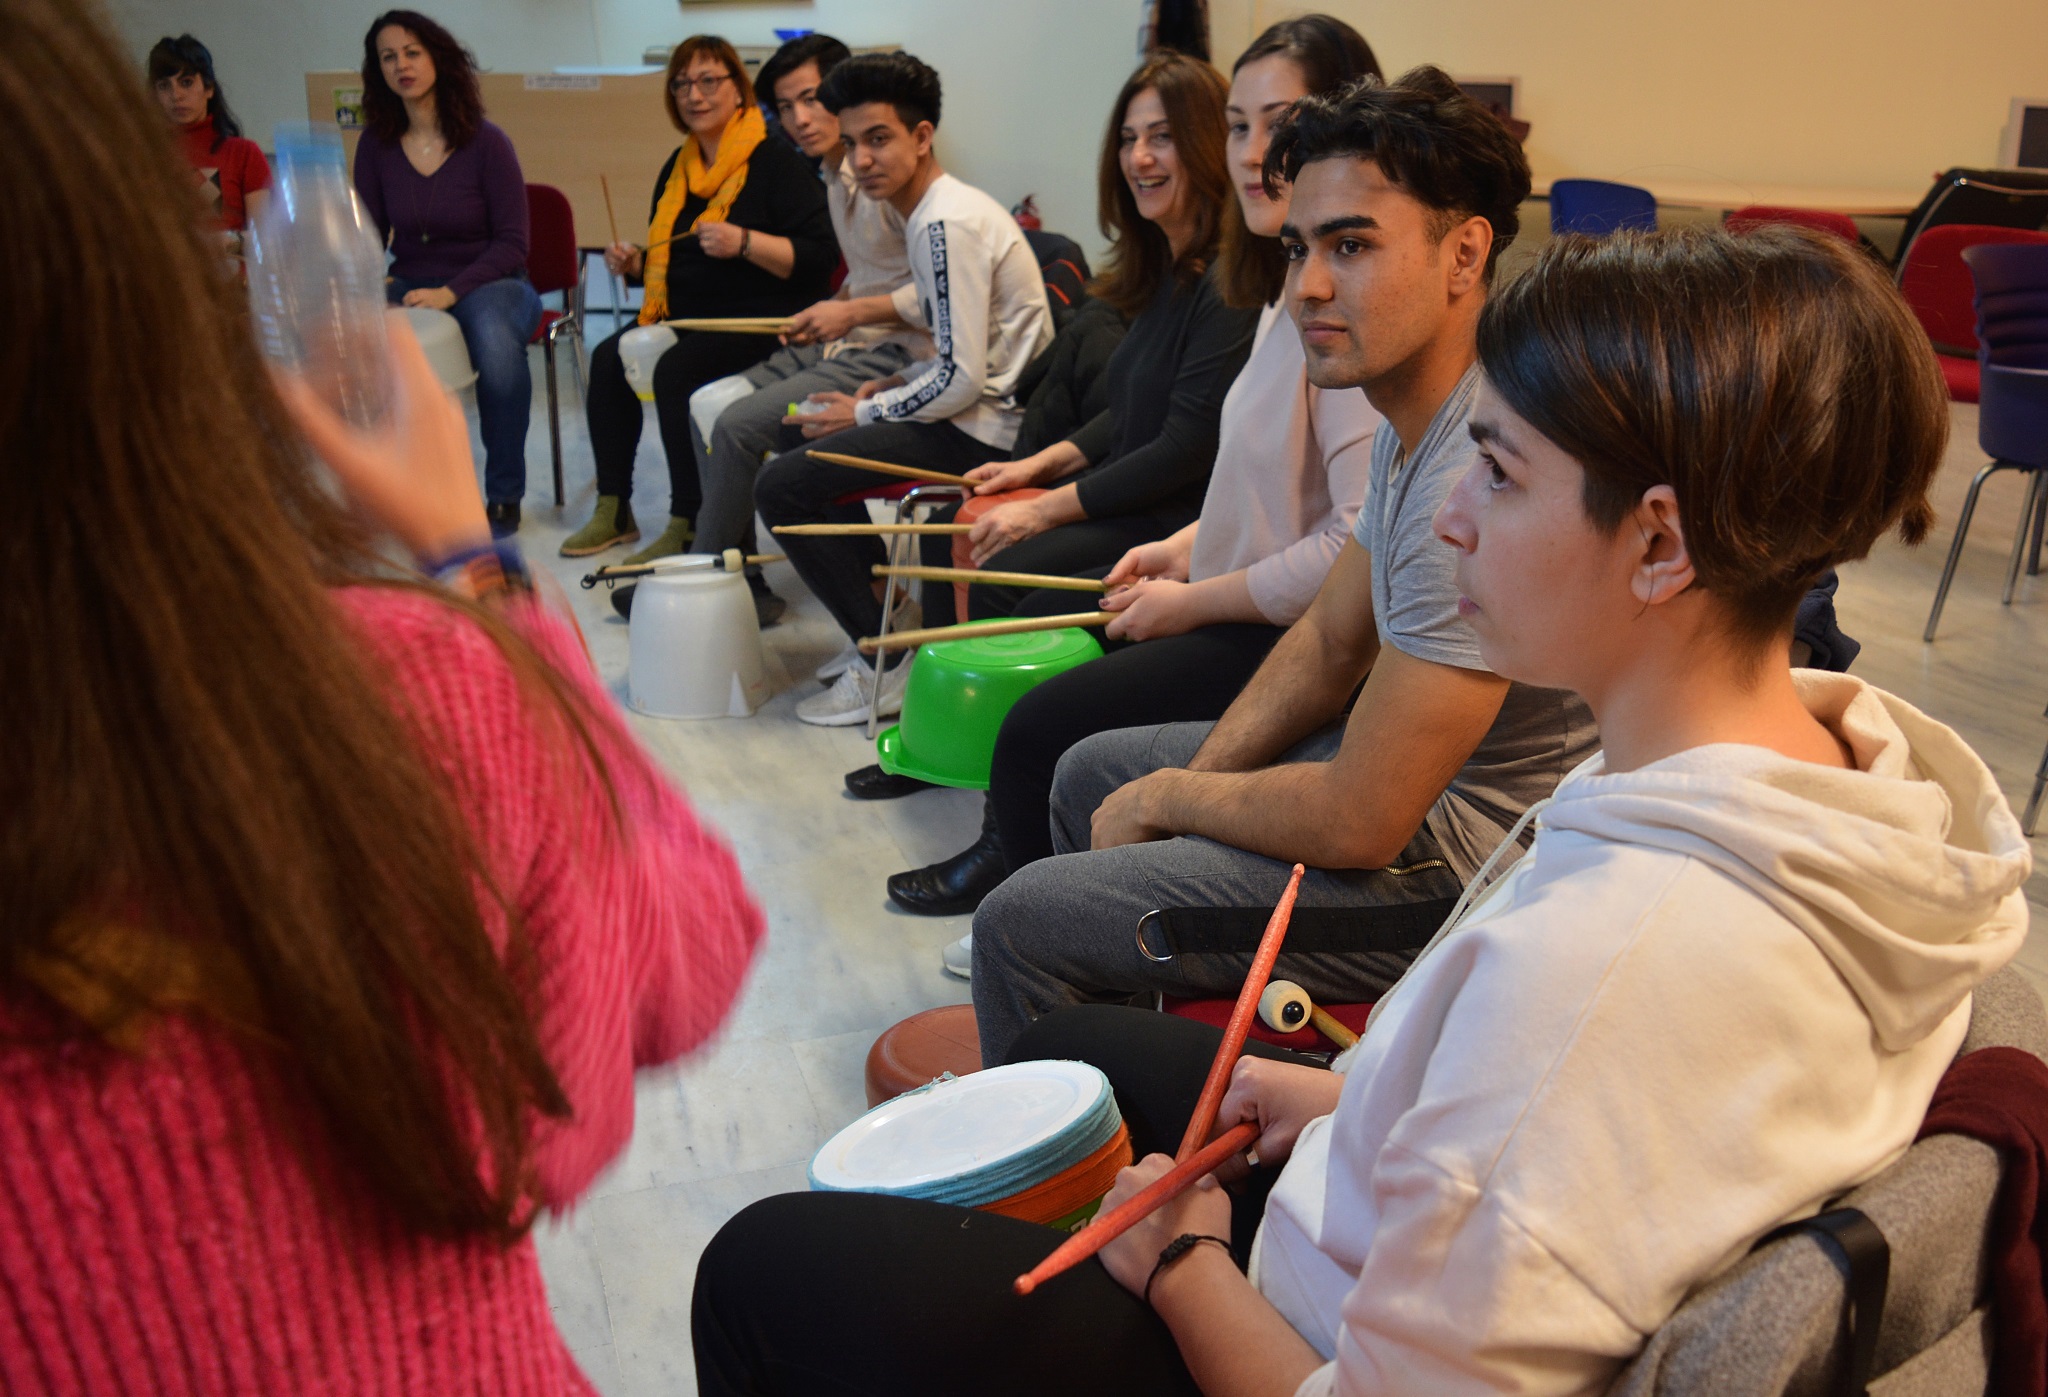 Percussion workshop using recycled materials